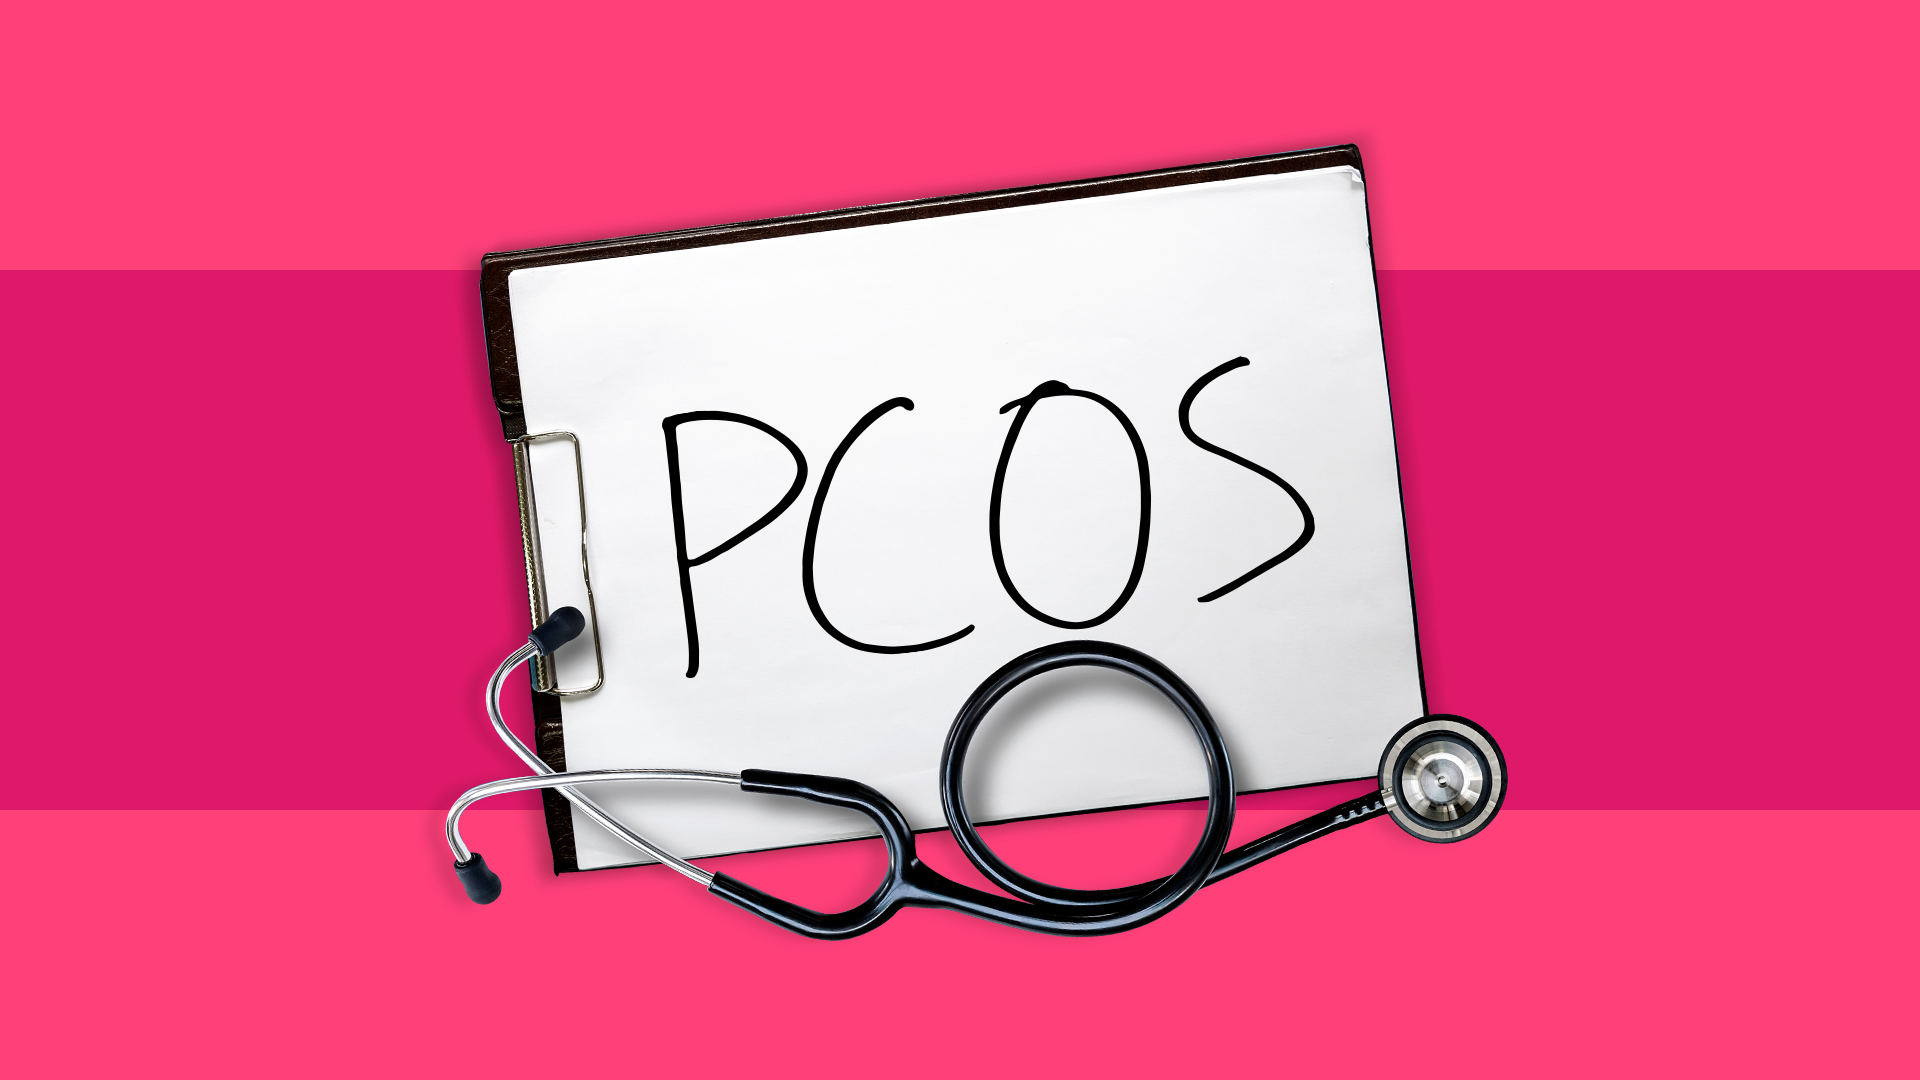 PCOS symptoms: What are the early signs of PCOS?